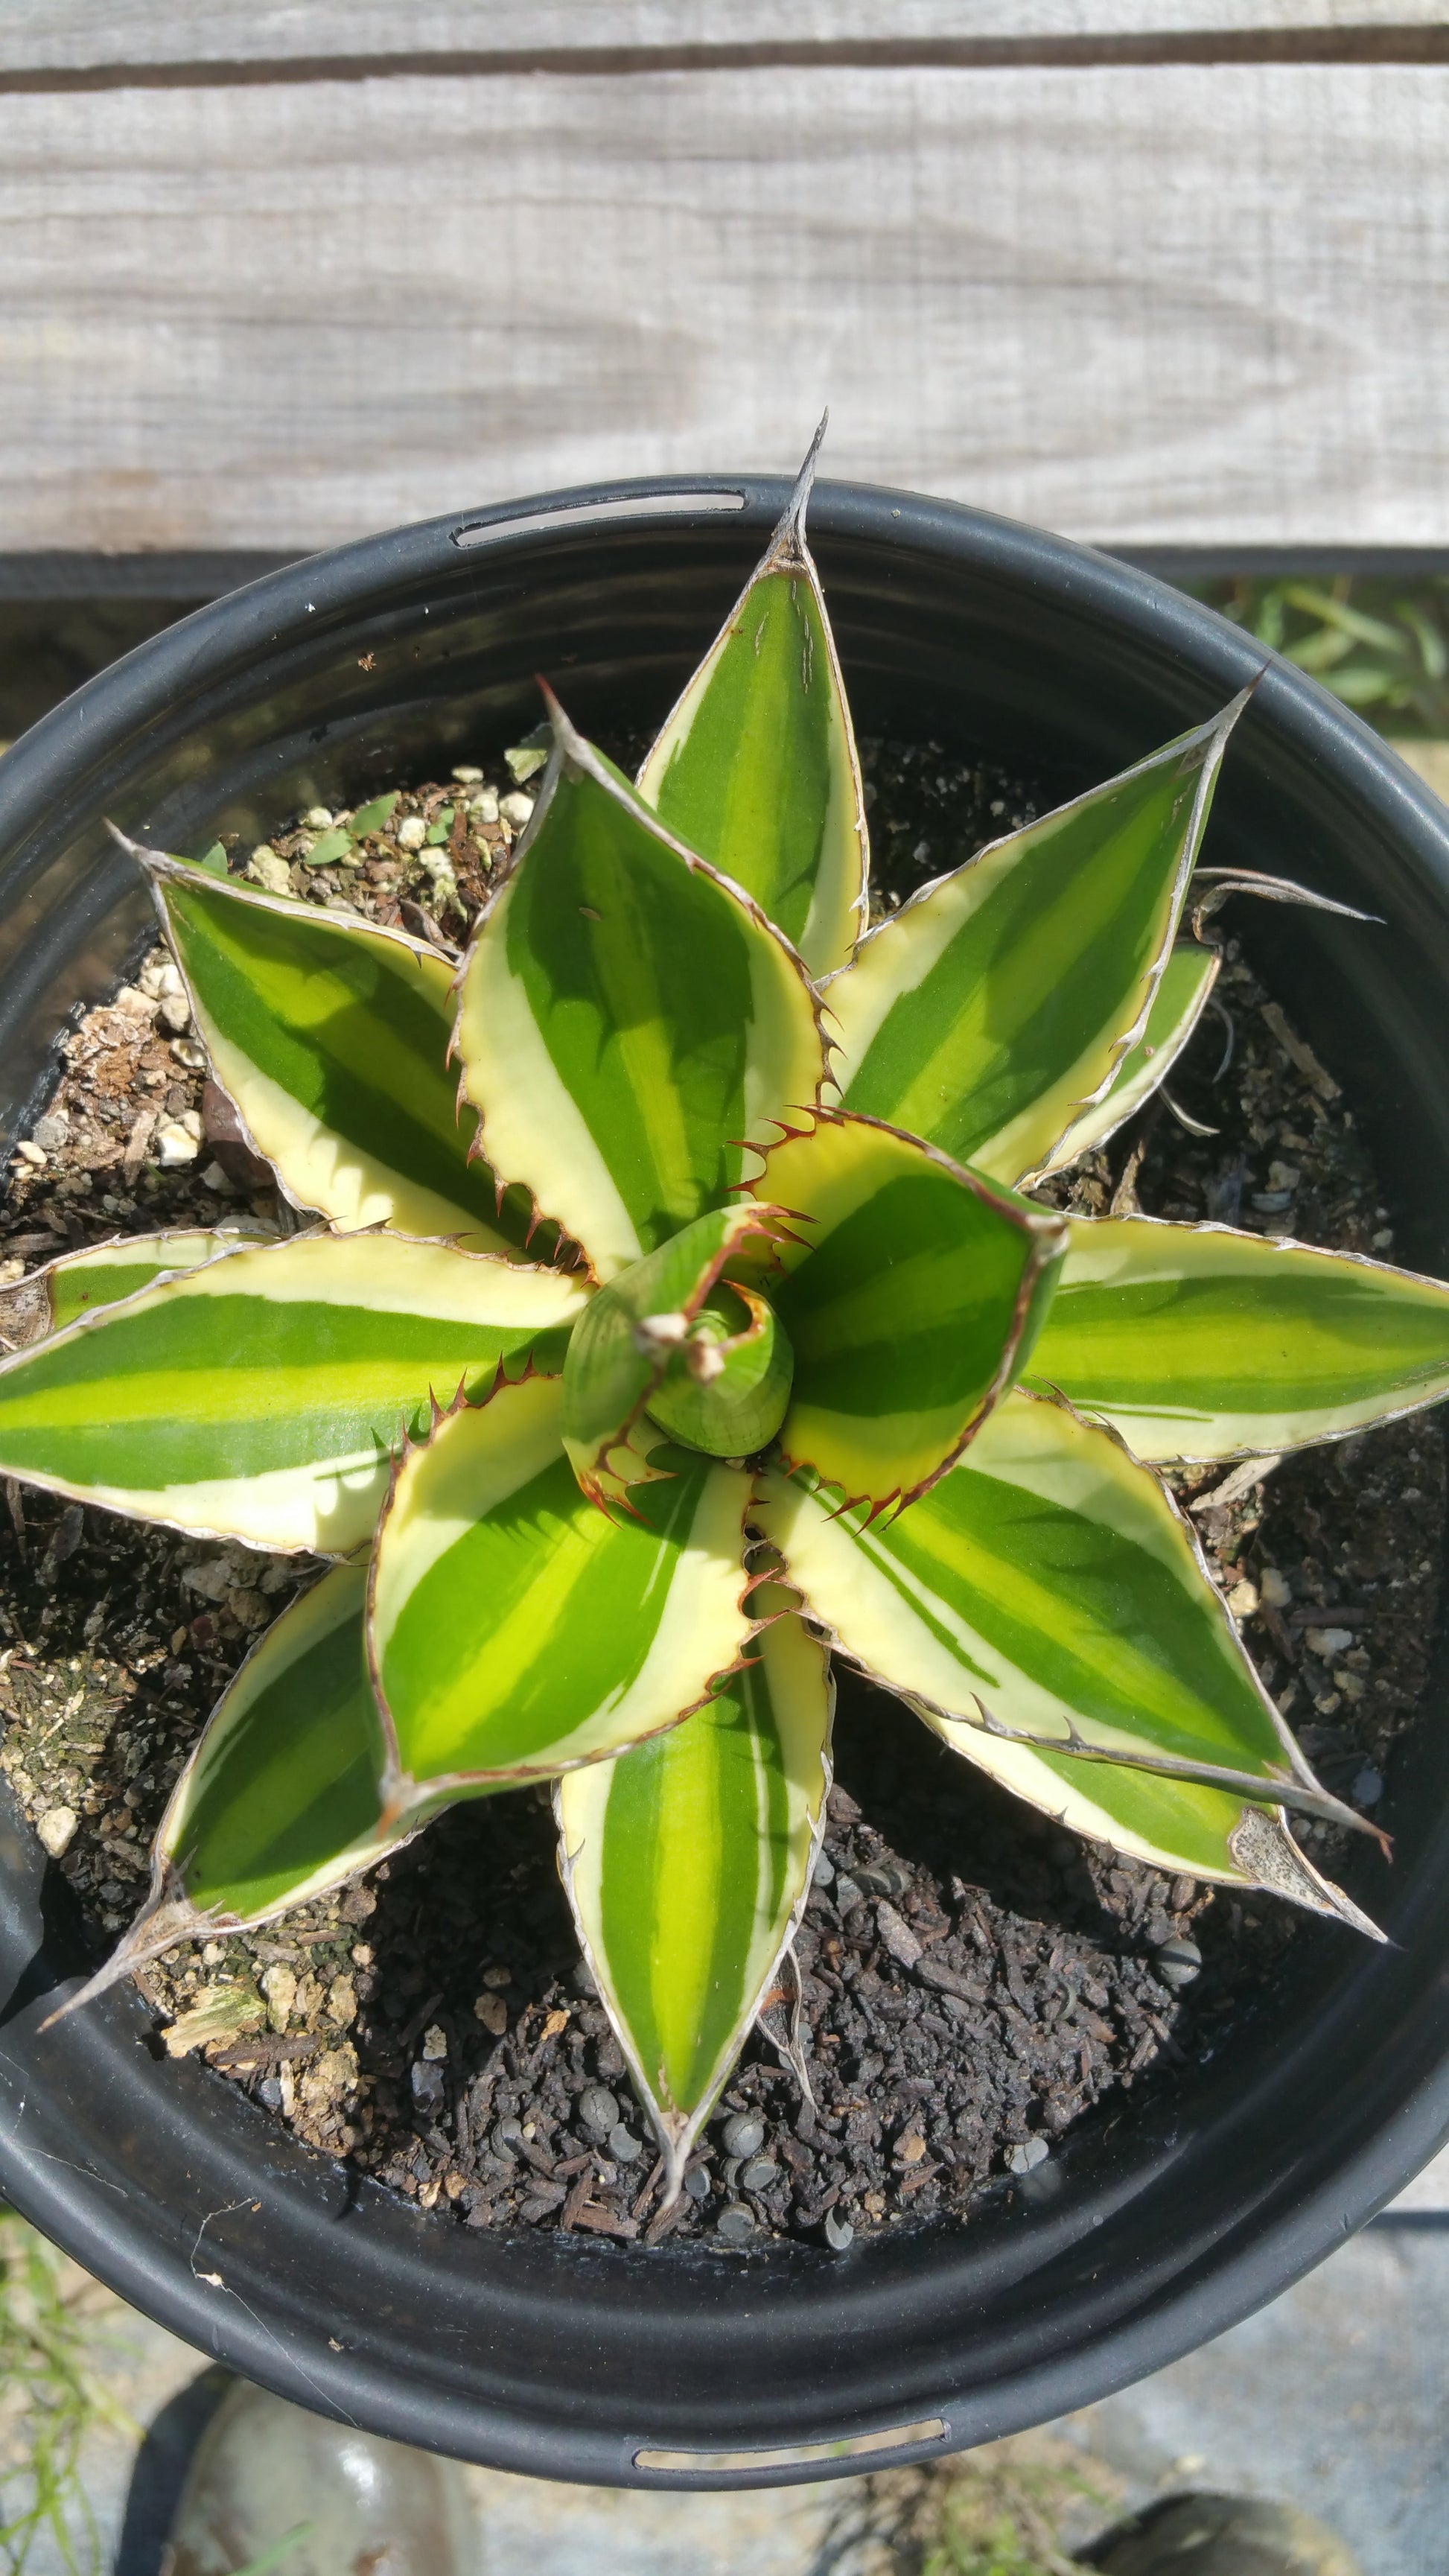 Top down view of young agave plant with yellow, green, and cream stripes and red spines